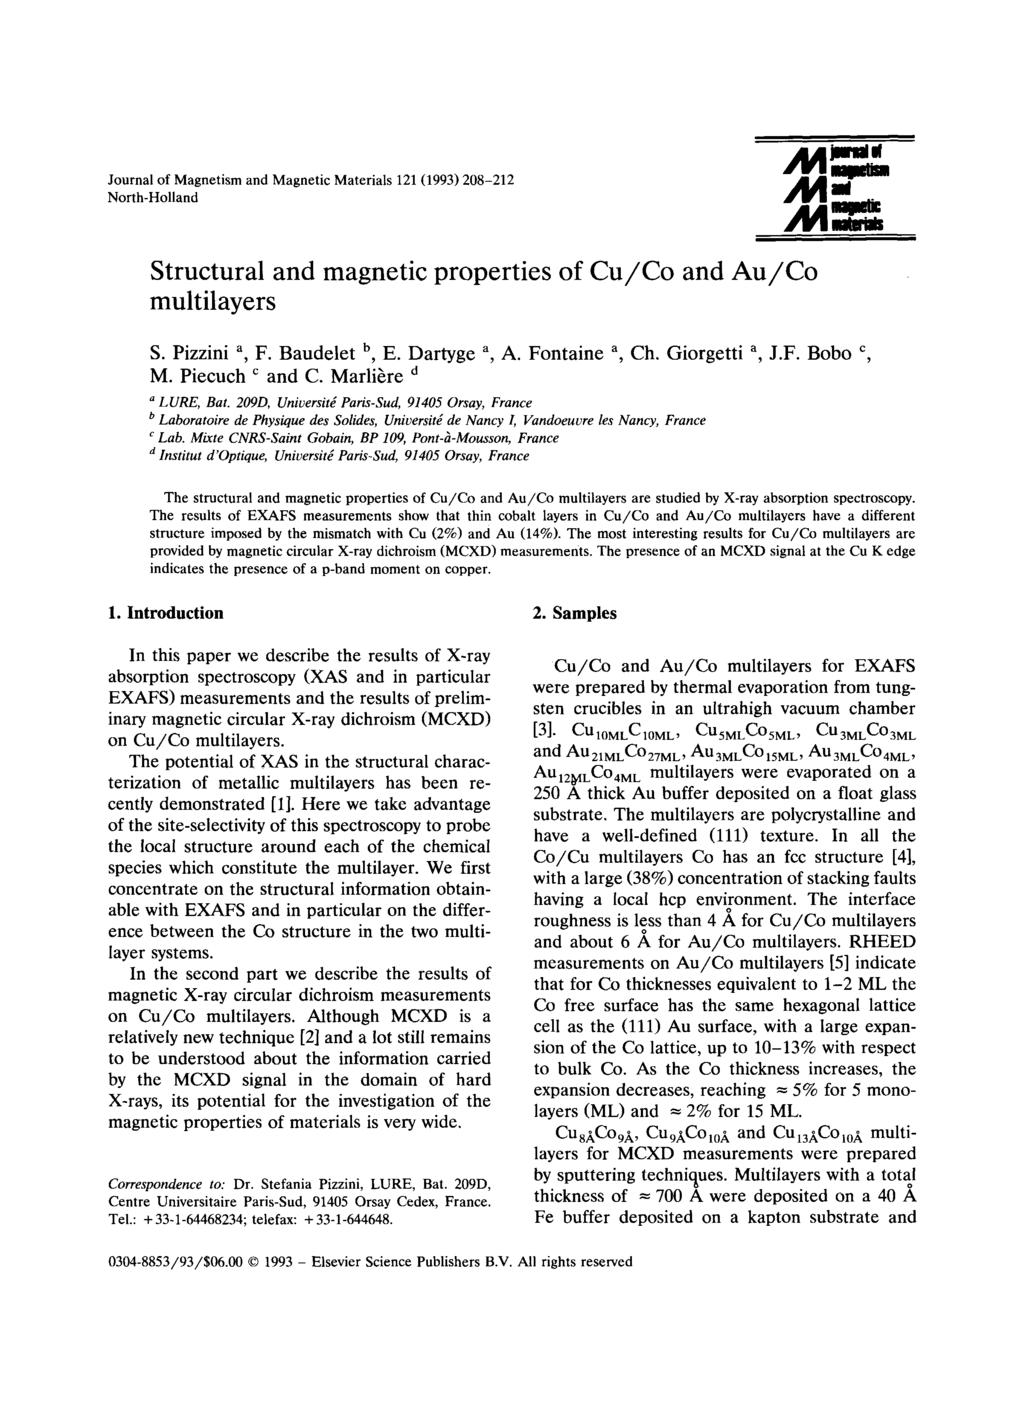 Journal of Magnetism and Magnetic Materials 121 (1993) 208-212 North-Holland Structural and magnetic properties of Cu/Co and Au/Co multilayers S. Pizzini a, F. Baudelet b, E. Dartyge a, m.